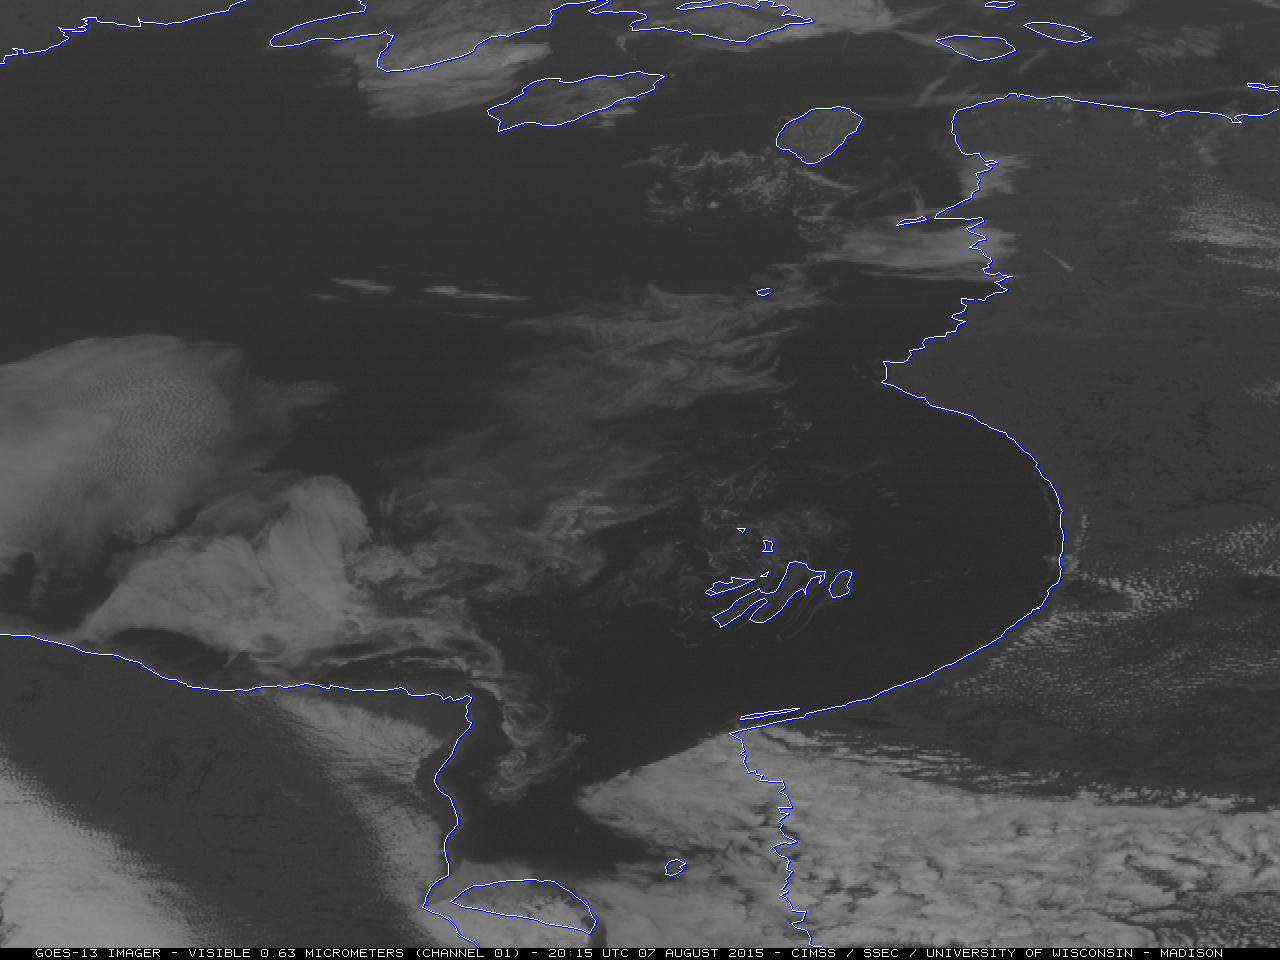 GOES-13 visible (0.63 µm) images [click to play animation]